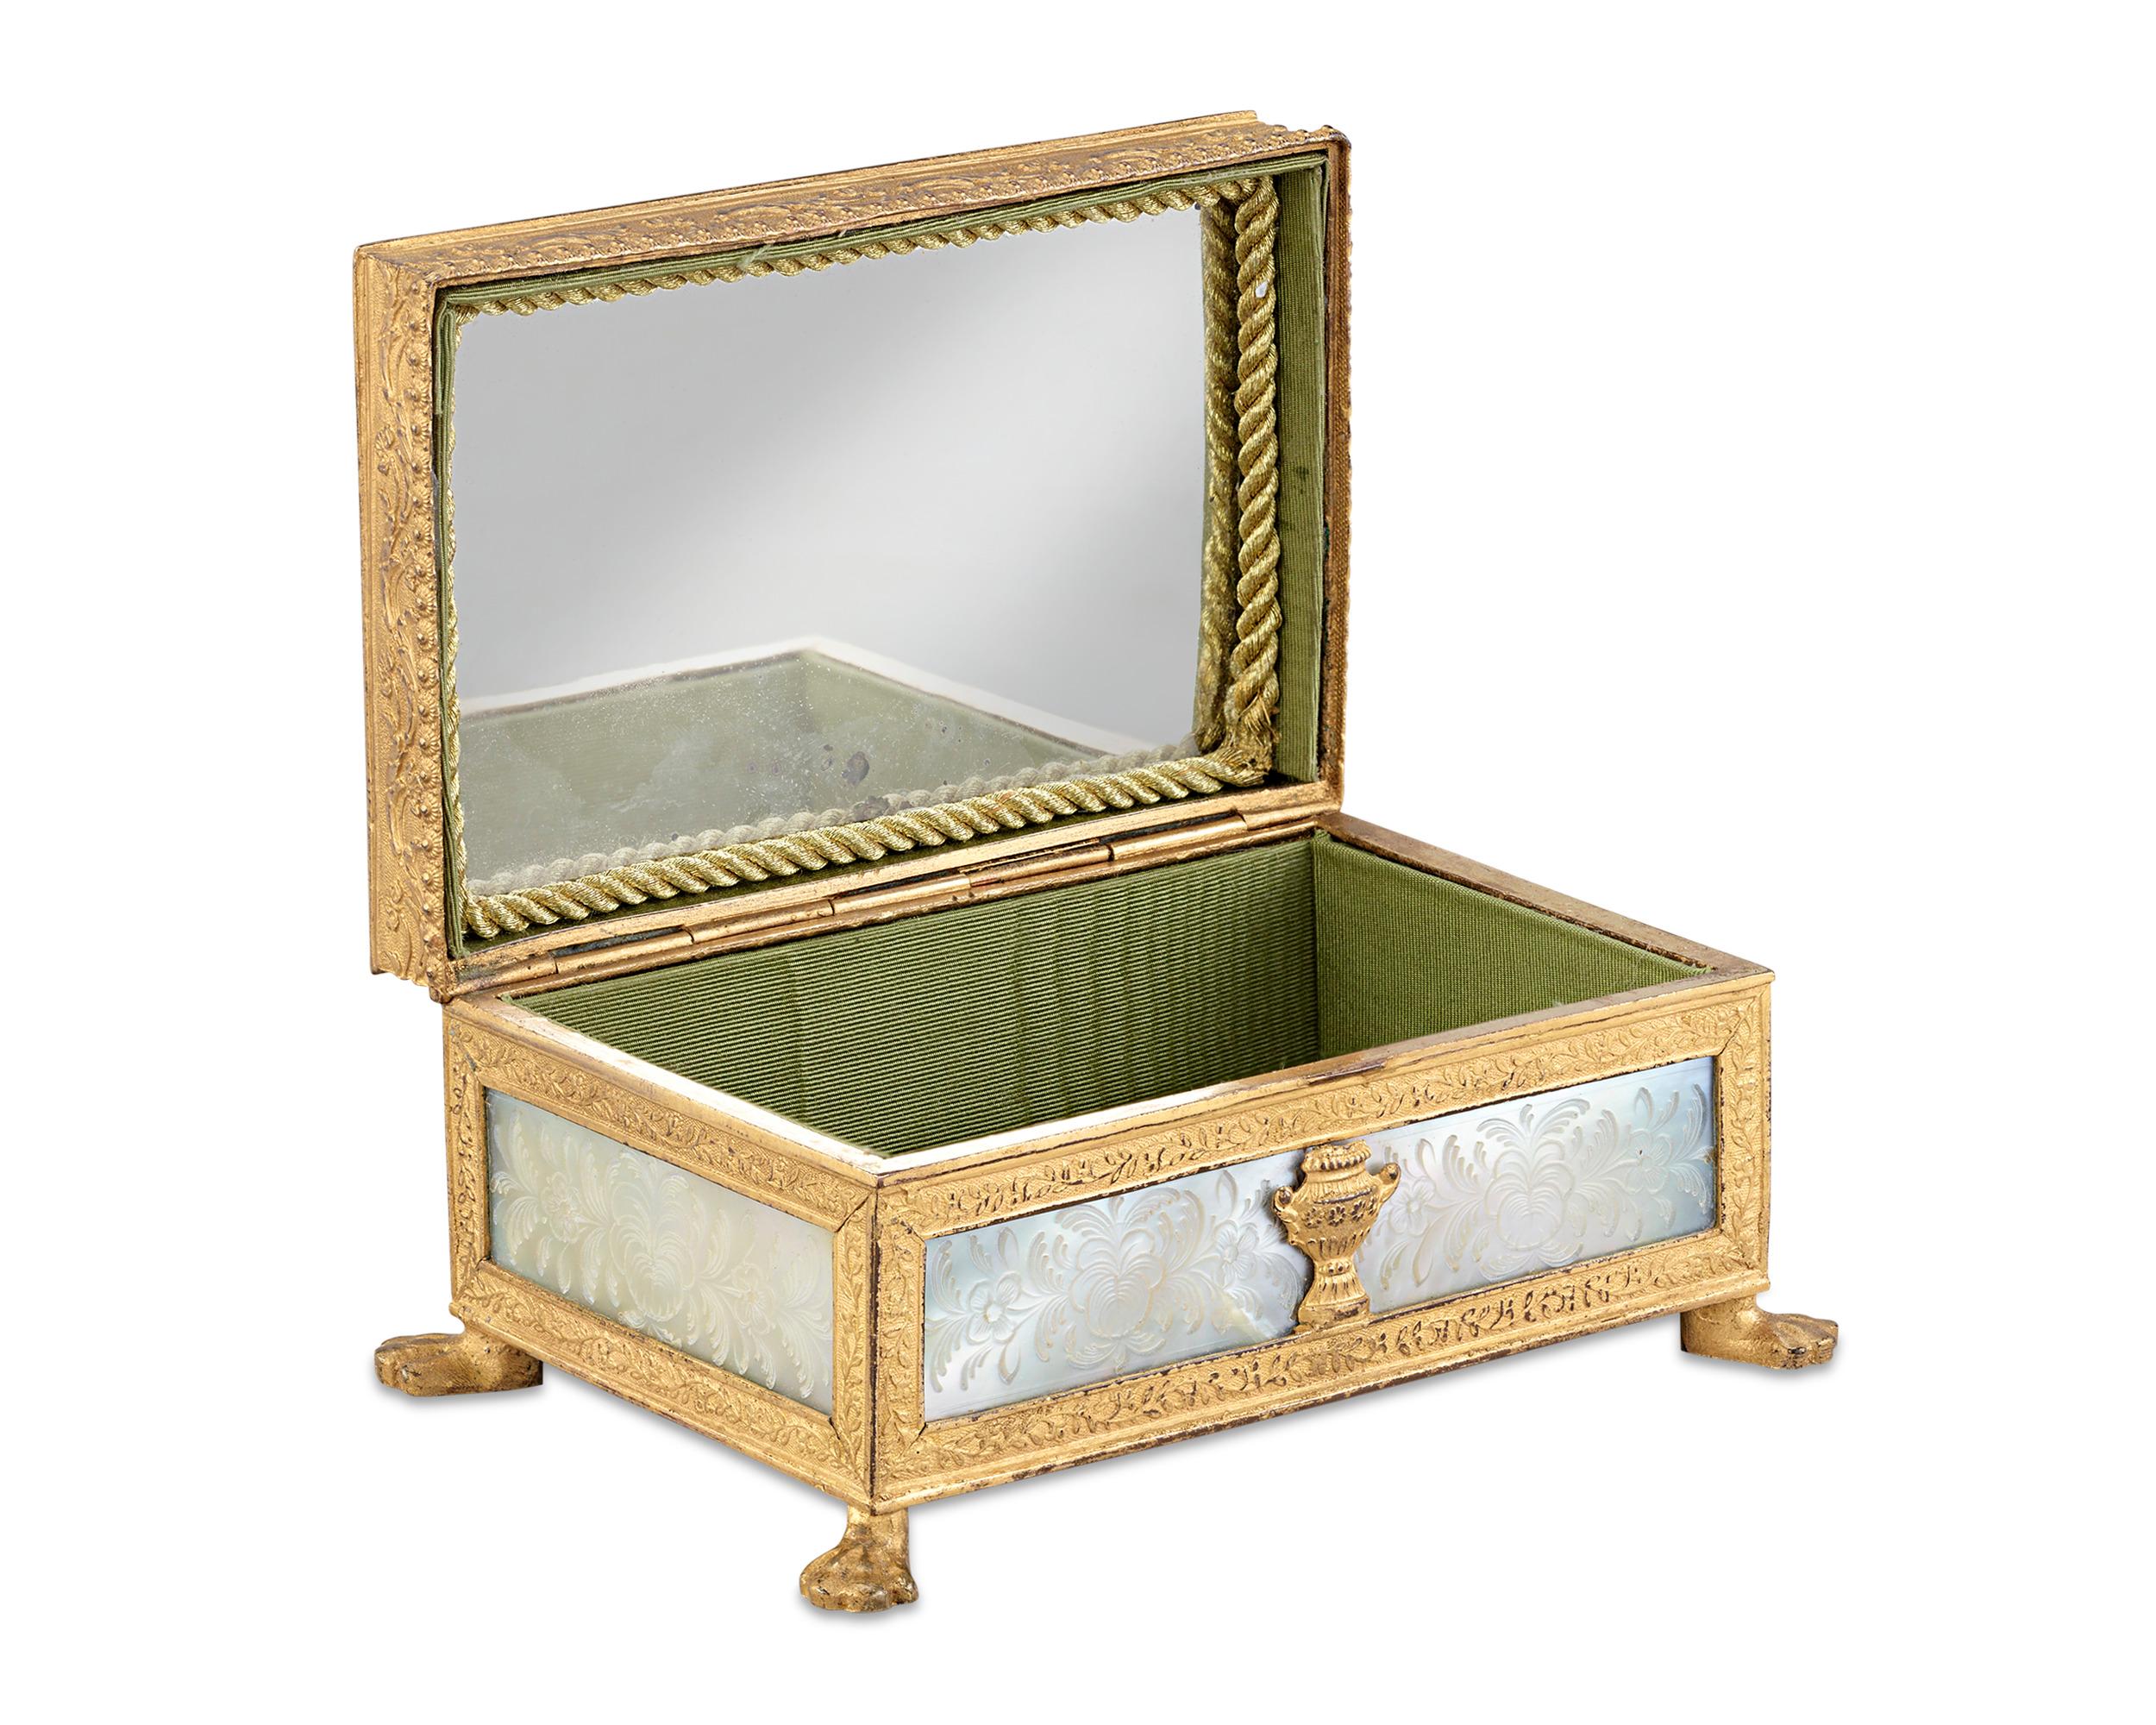 This beautiful French Palais Royal box is an outstanding treasure inside and out. A gem of the Restoration period, this delicate box is crafted of mother-of-pearl, mounted in fine doré bronze and intricately engraved in a floral motif. Boxes sold in